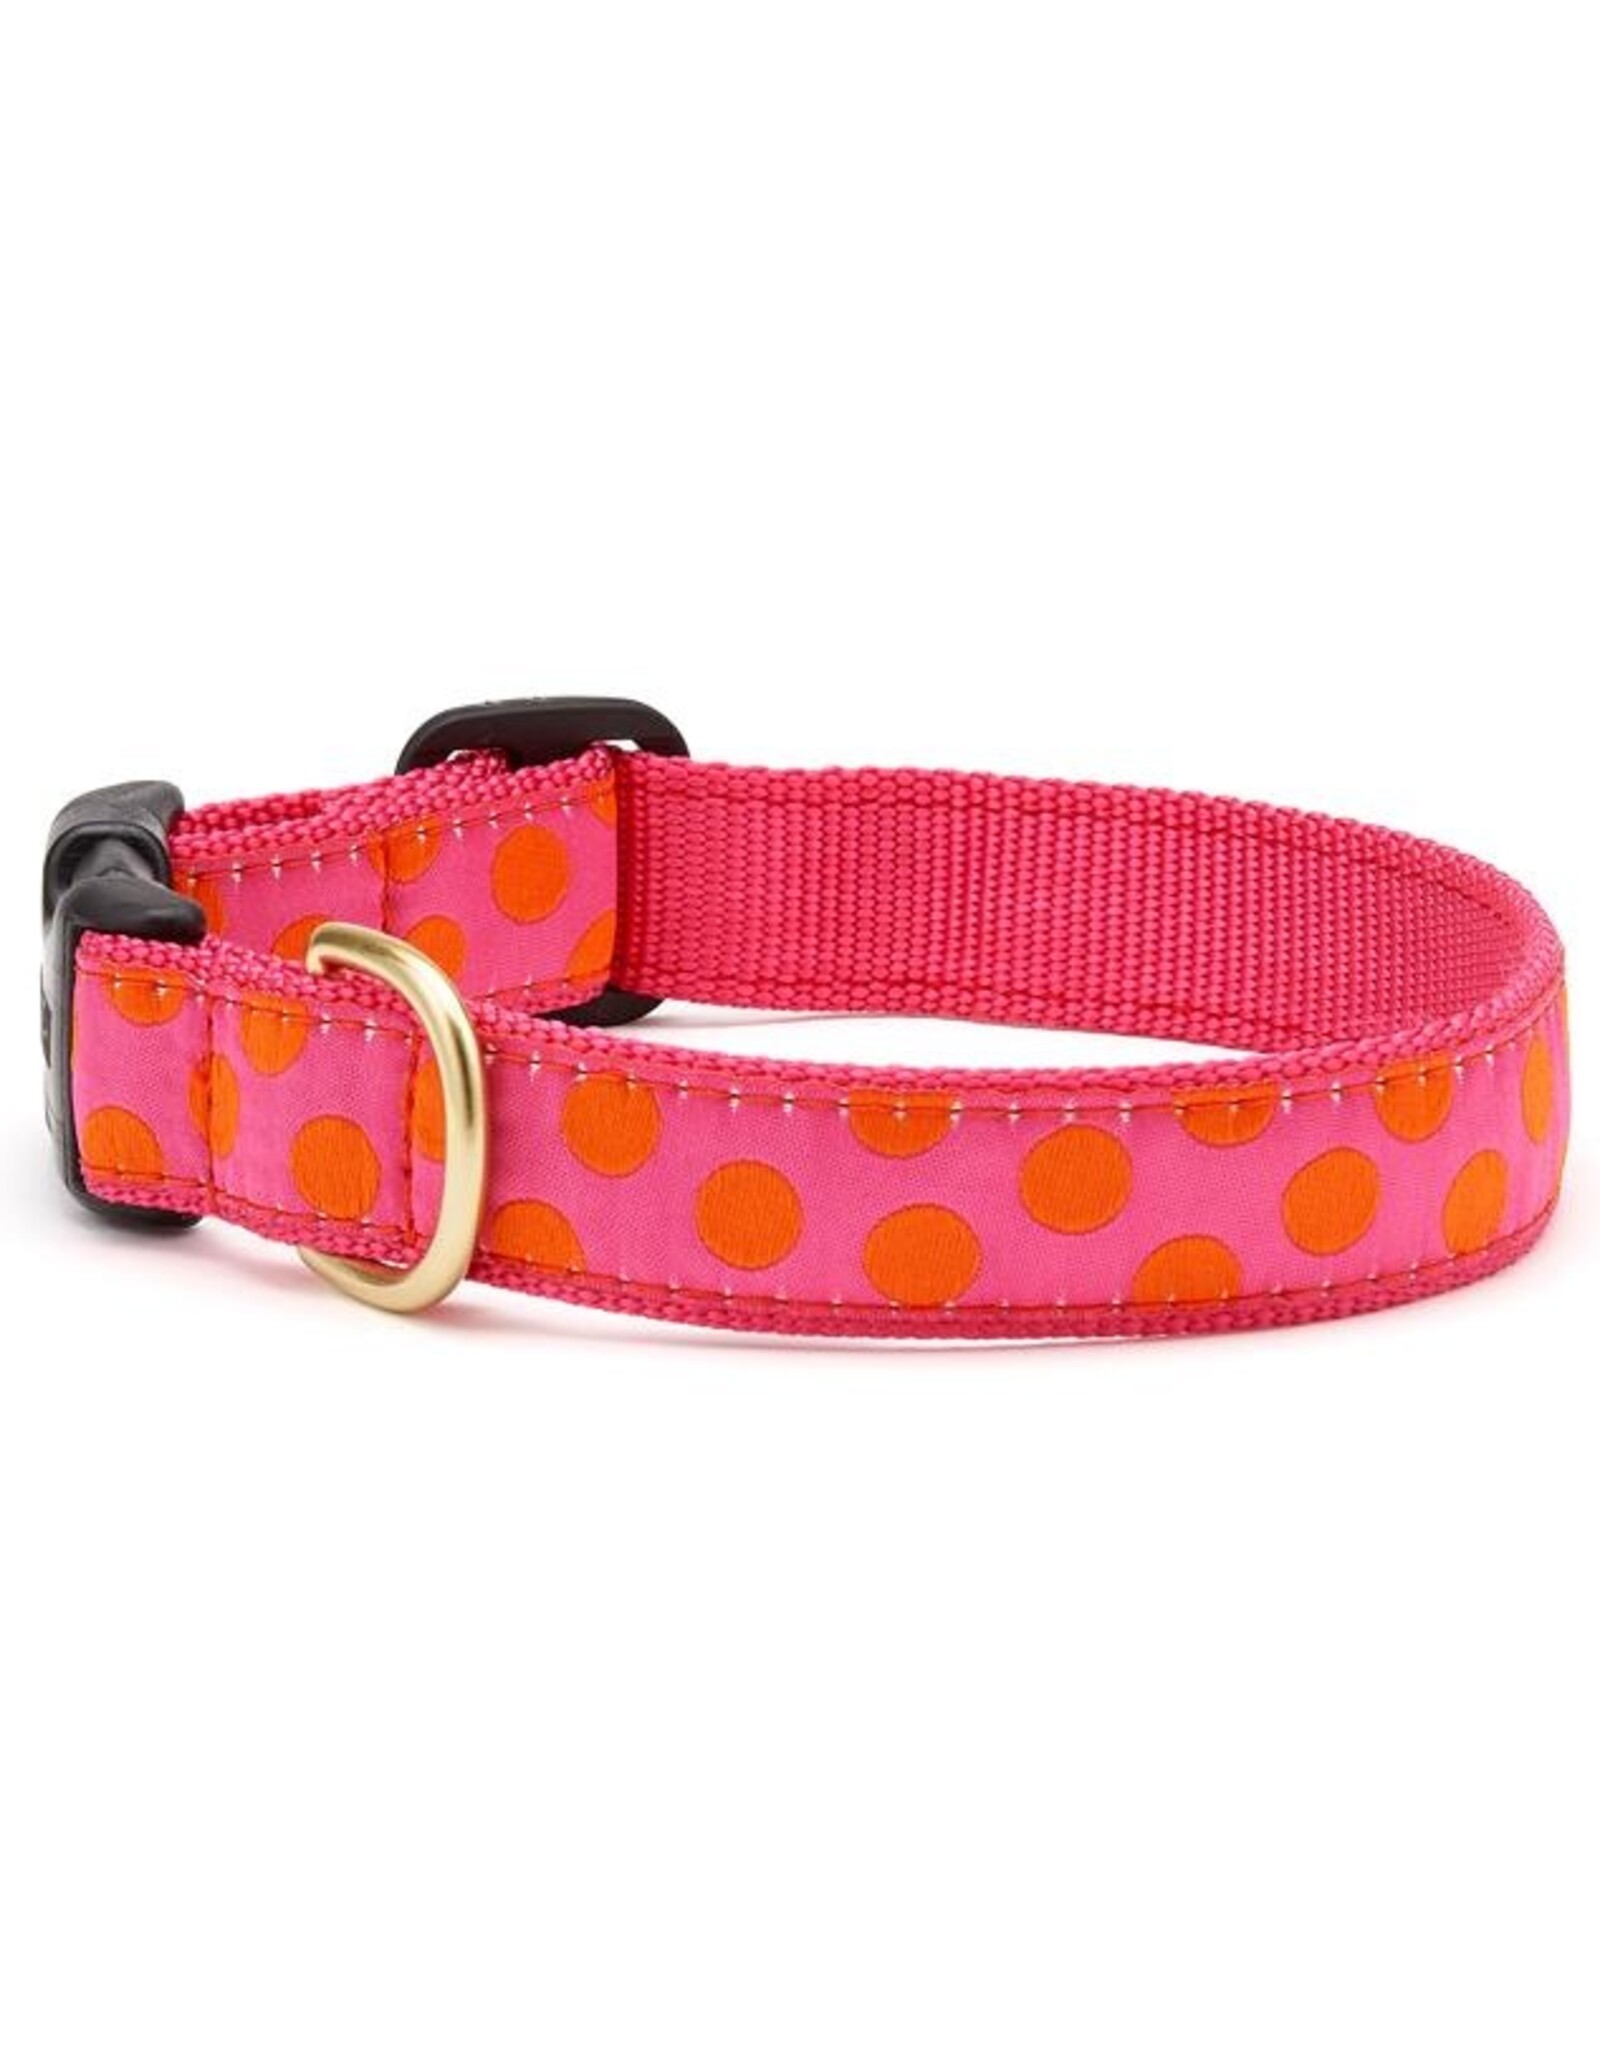 Up Country Inc. Pink Orange Dots